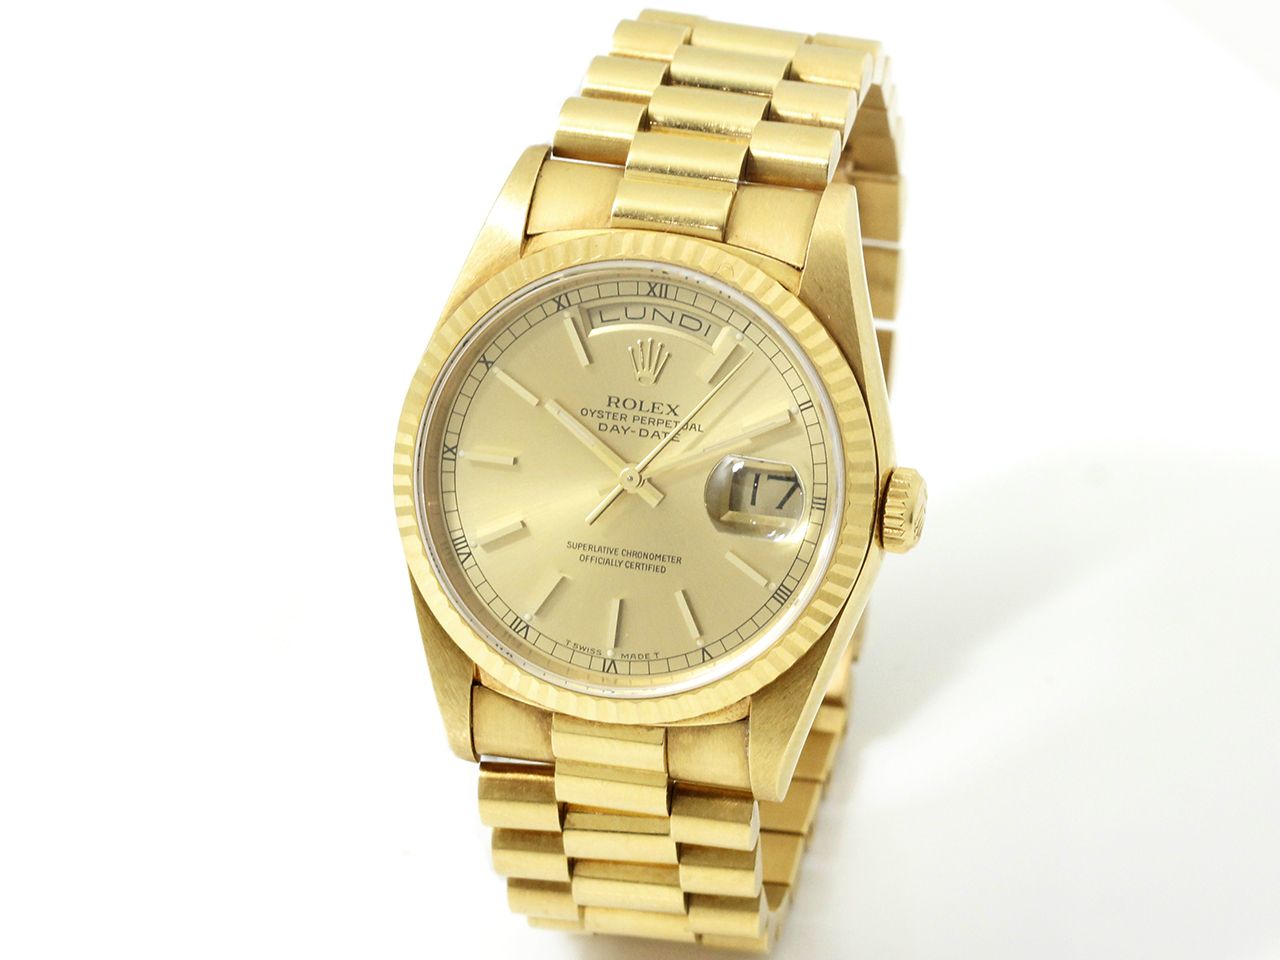 ROLEX ''OYSTER PERPETUAL DAY-DATE'' 
Herrenarmbanduhr aus Gold (750).

Strahlend&hellip;